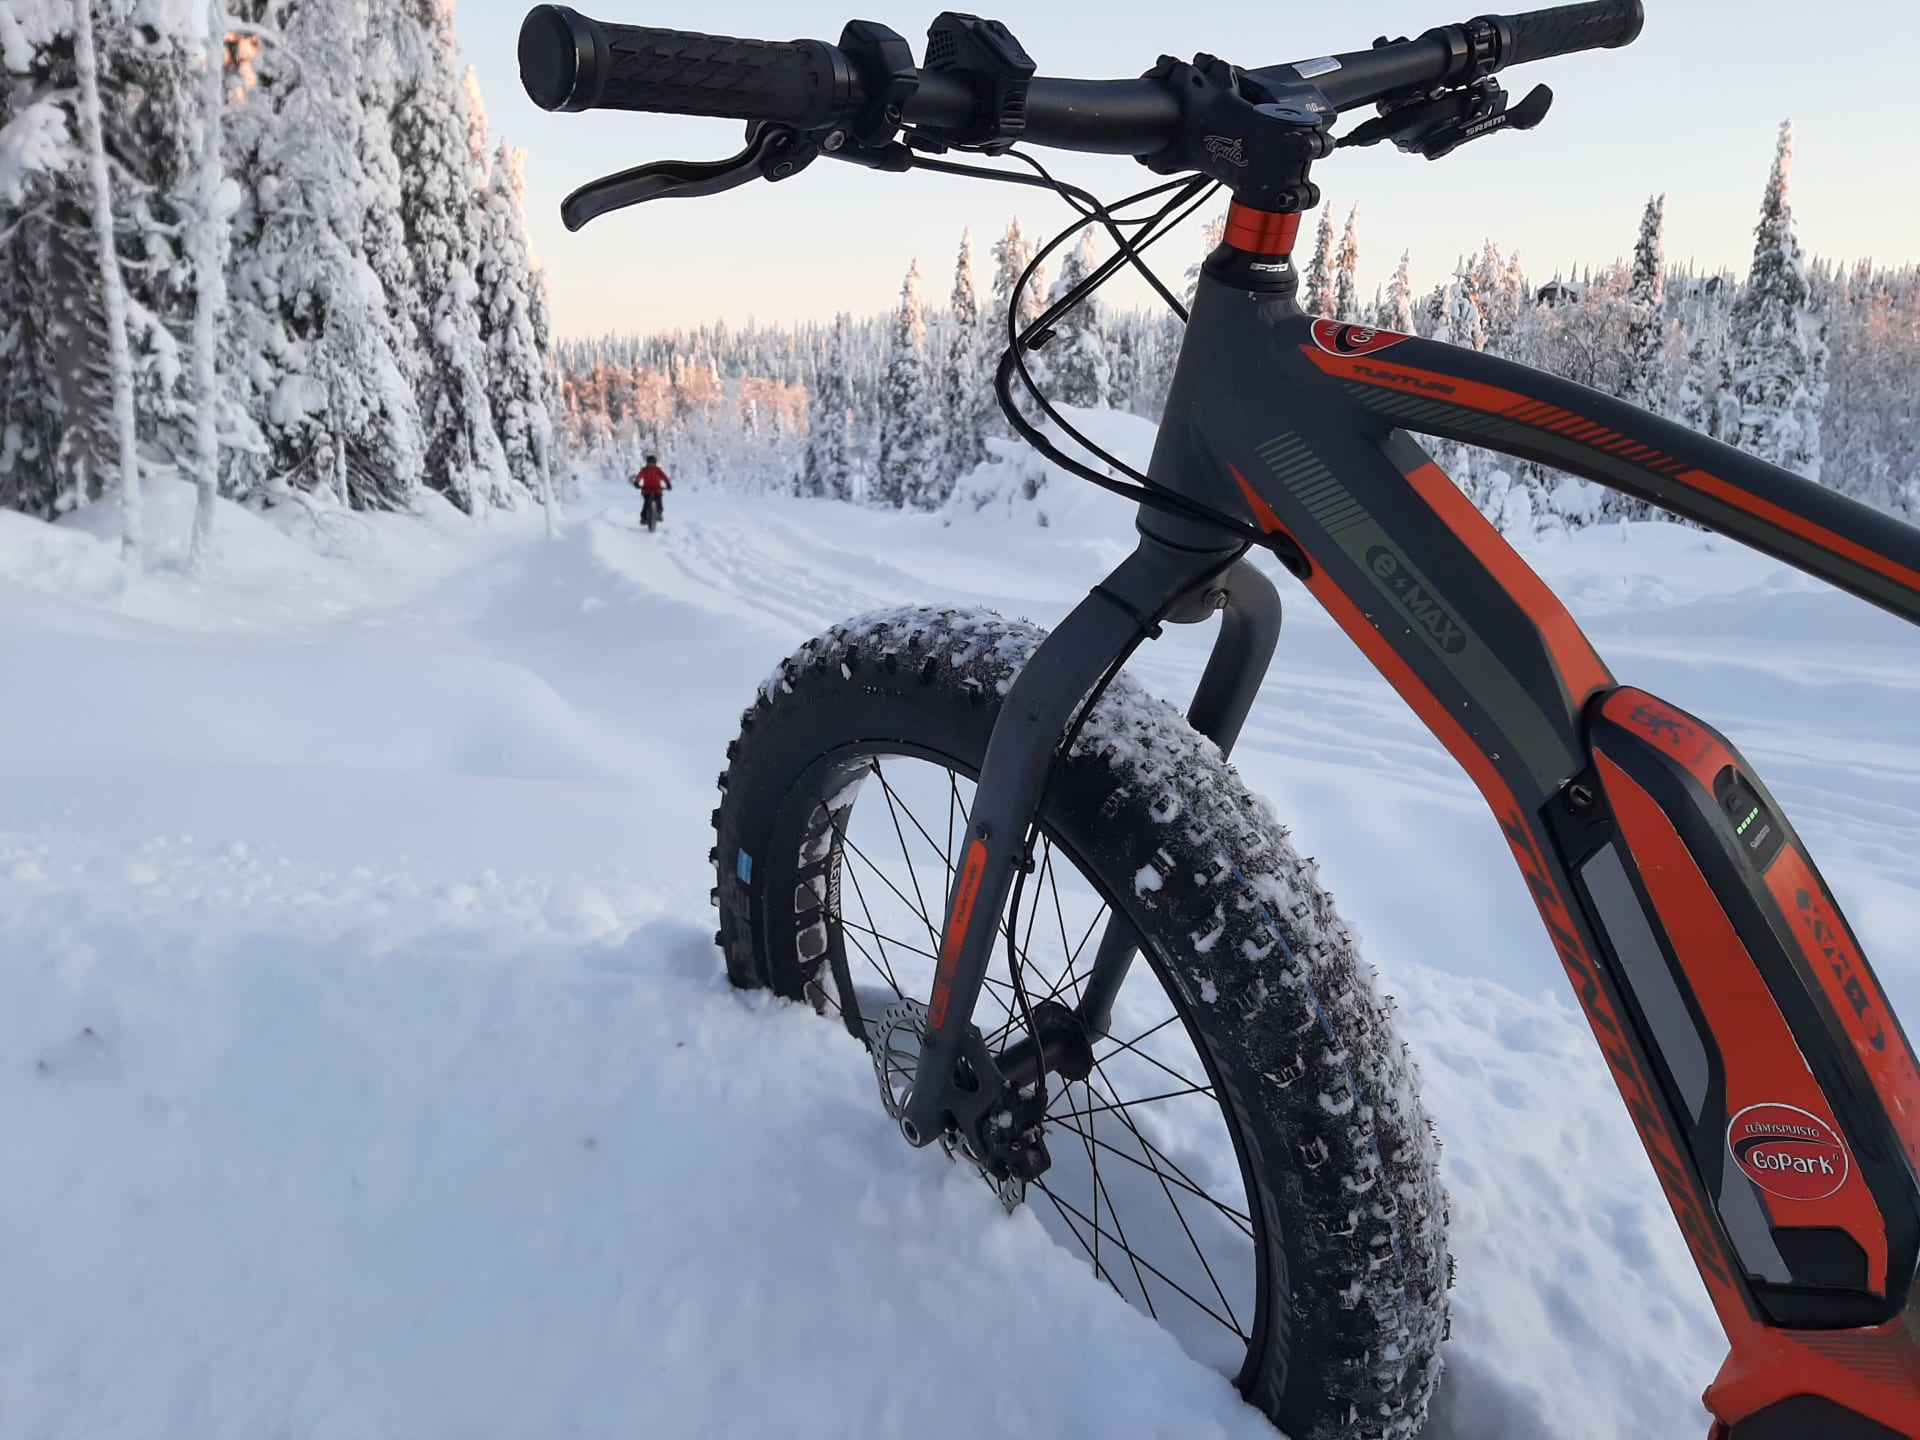 E-Fatbikes work in snow too.